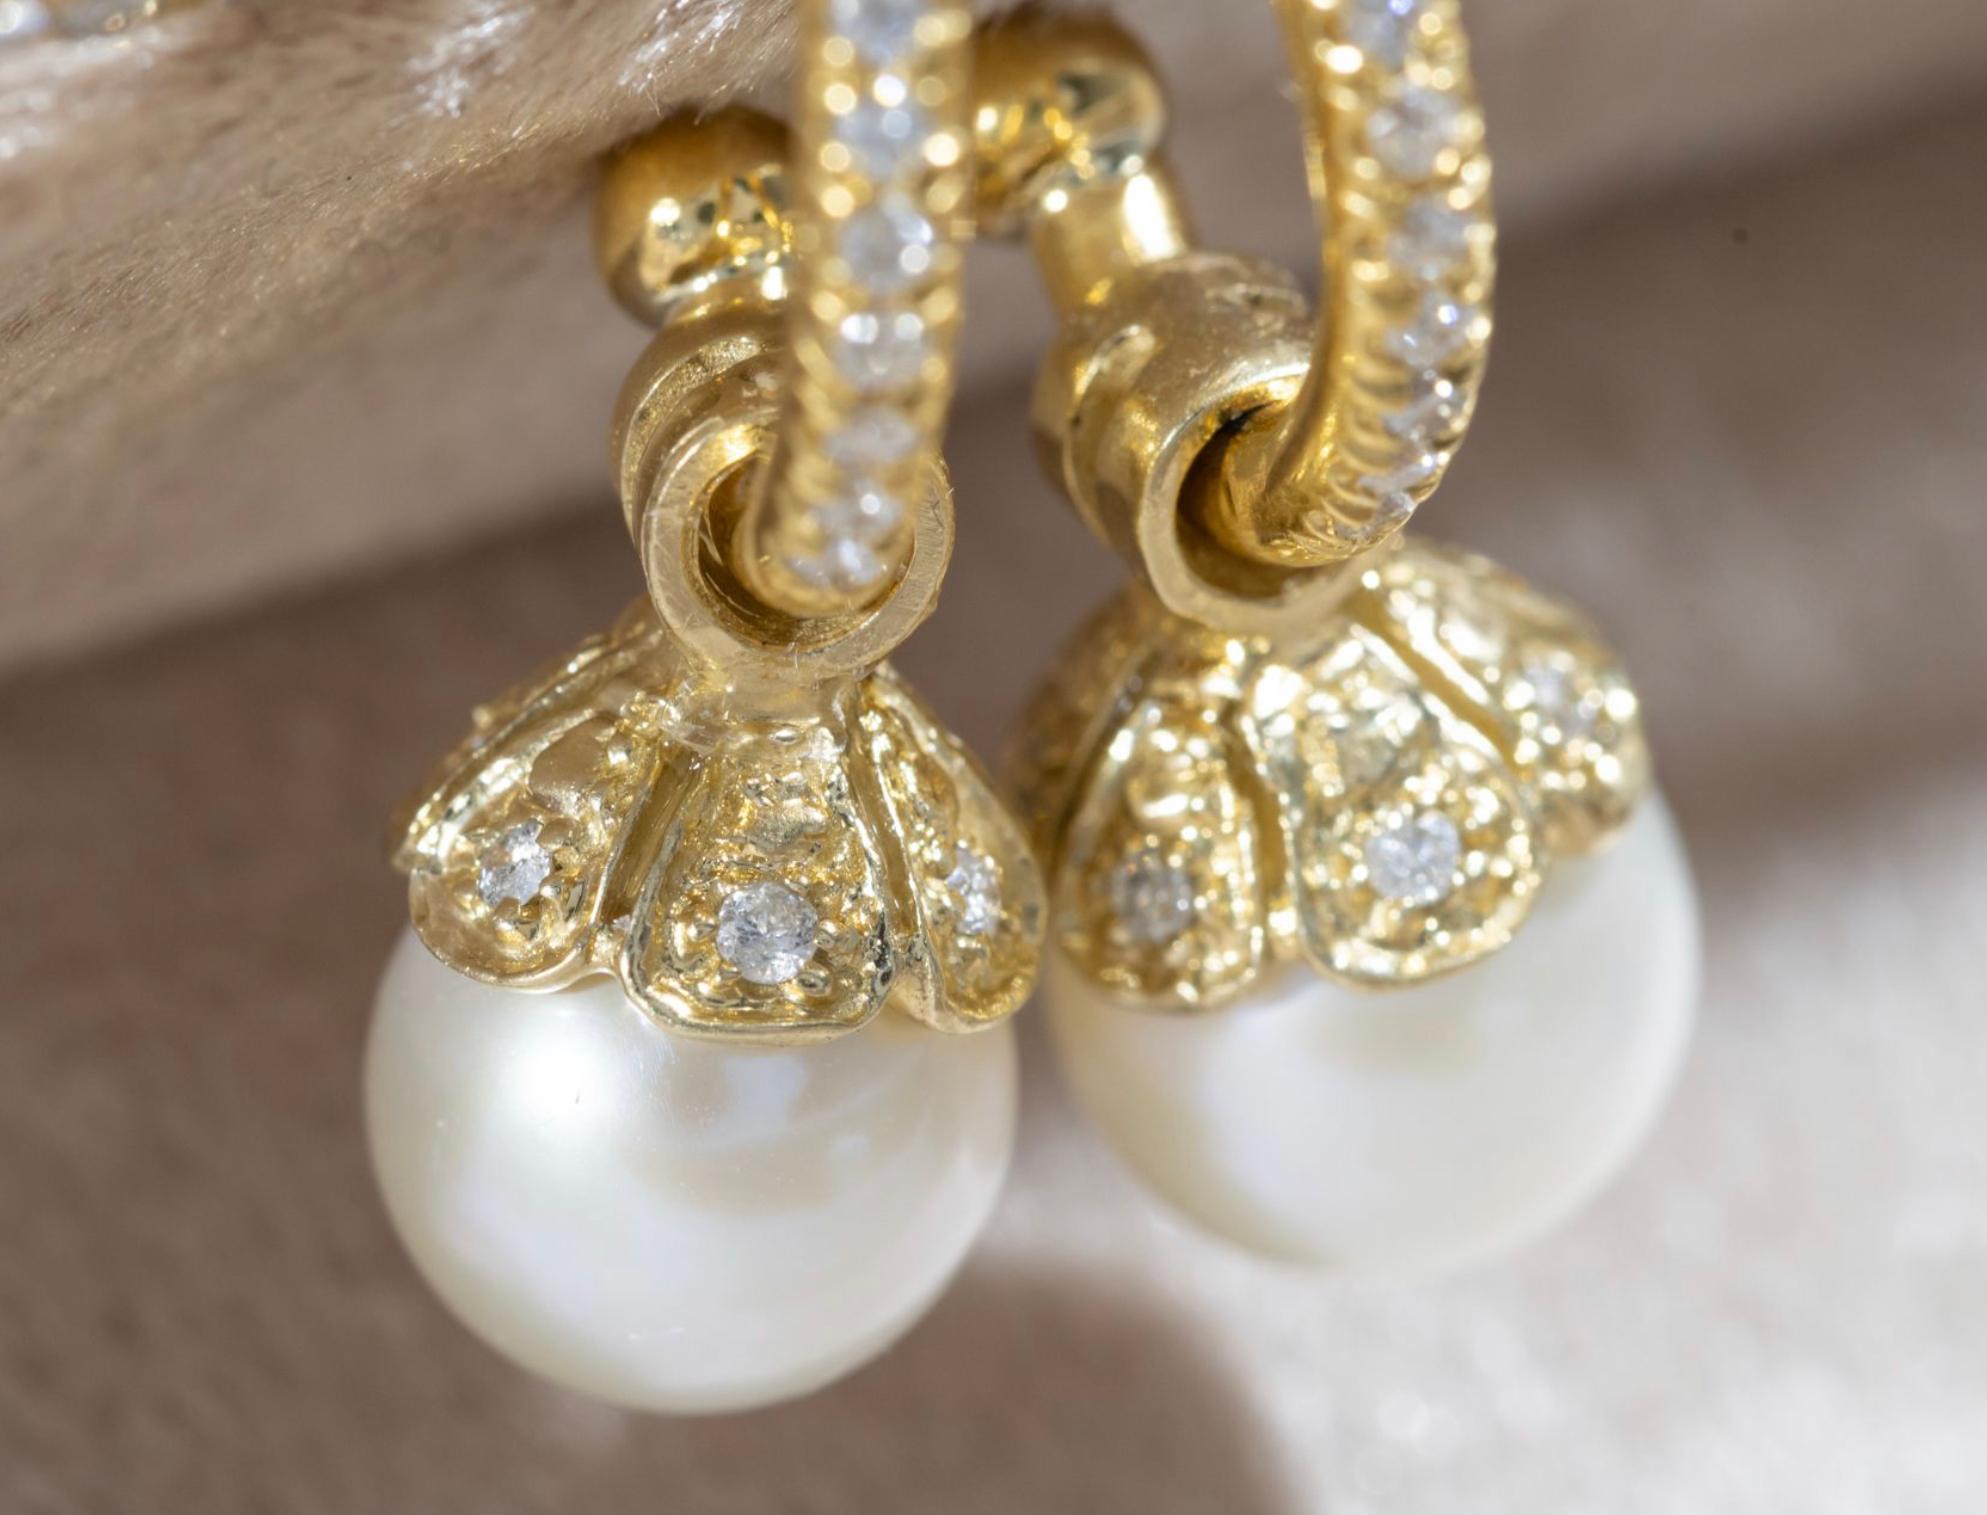 Paris & Lily, handmade, one-of-a-kind, 22K gold, diamond hoop earrings with removable gold, diamond and pearl pendants. The hoops are approximately 13mm in diameter with a post and brilliant diamonds surrounding 3/4 of the earring.  The freshwater